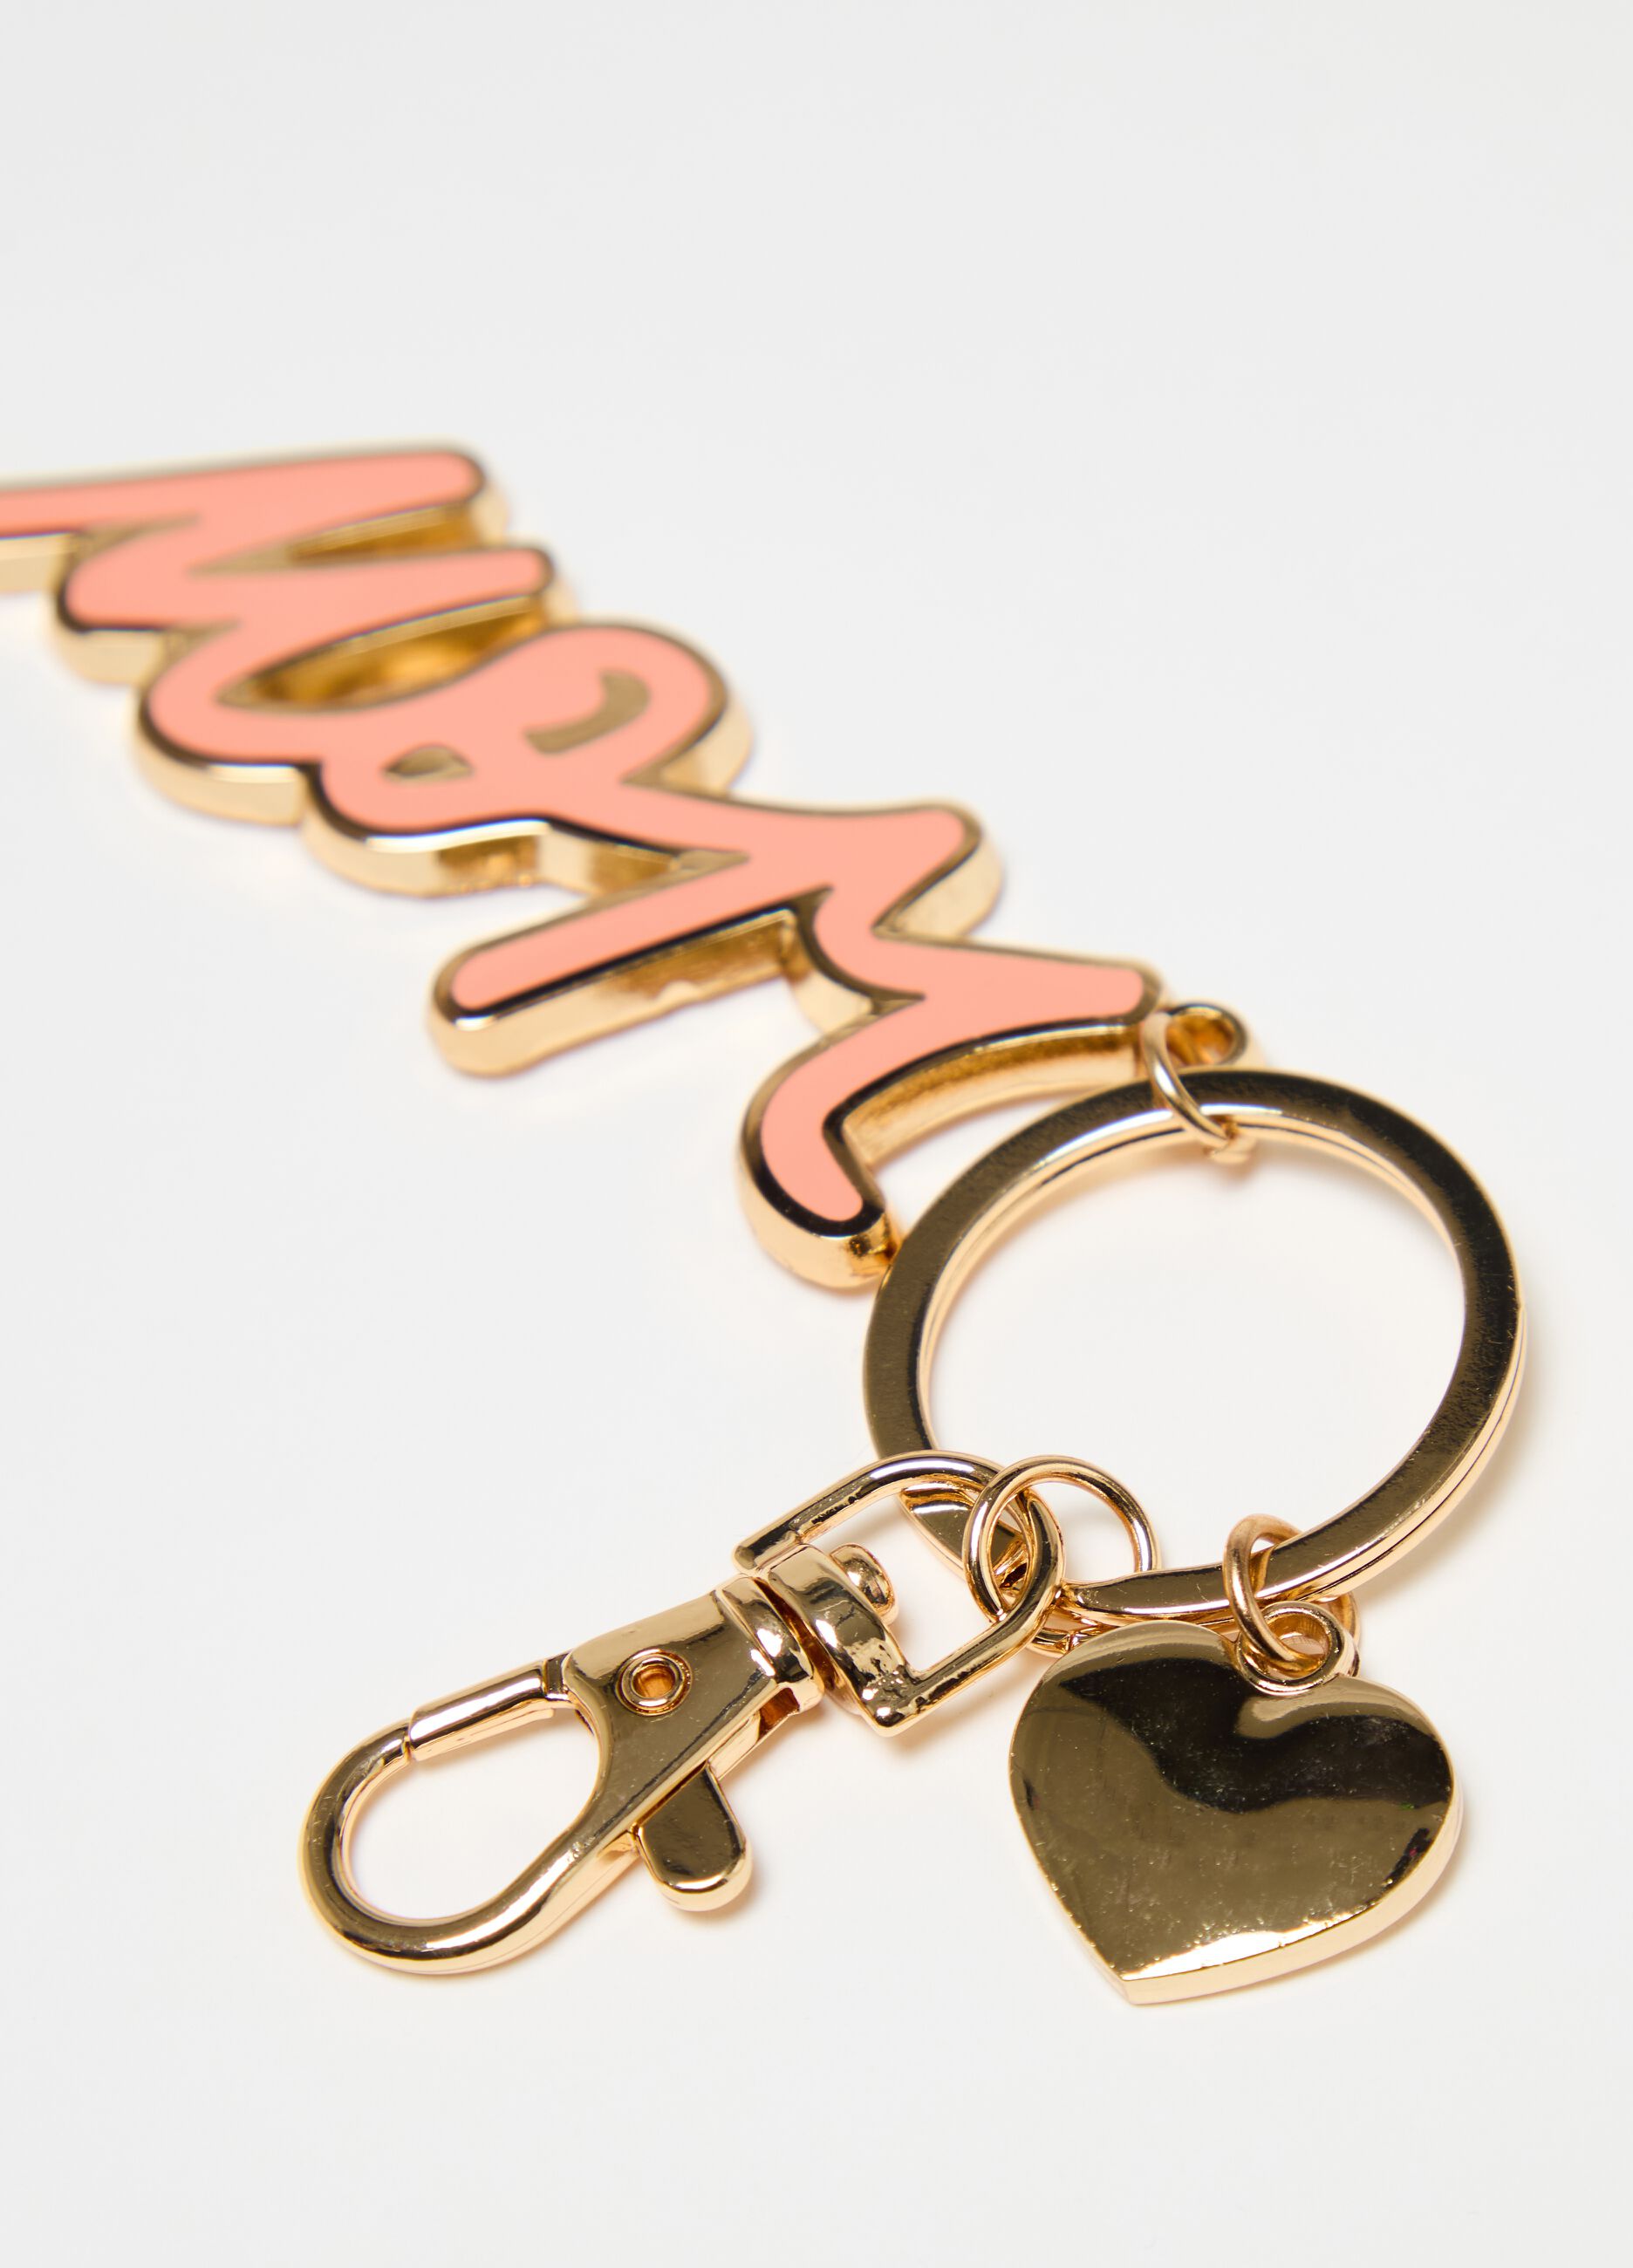 Keyring with enamel lettering and heart